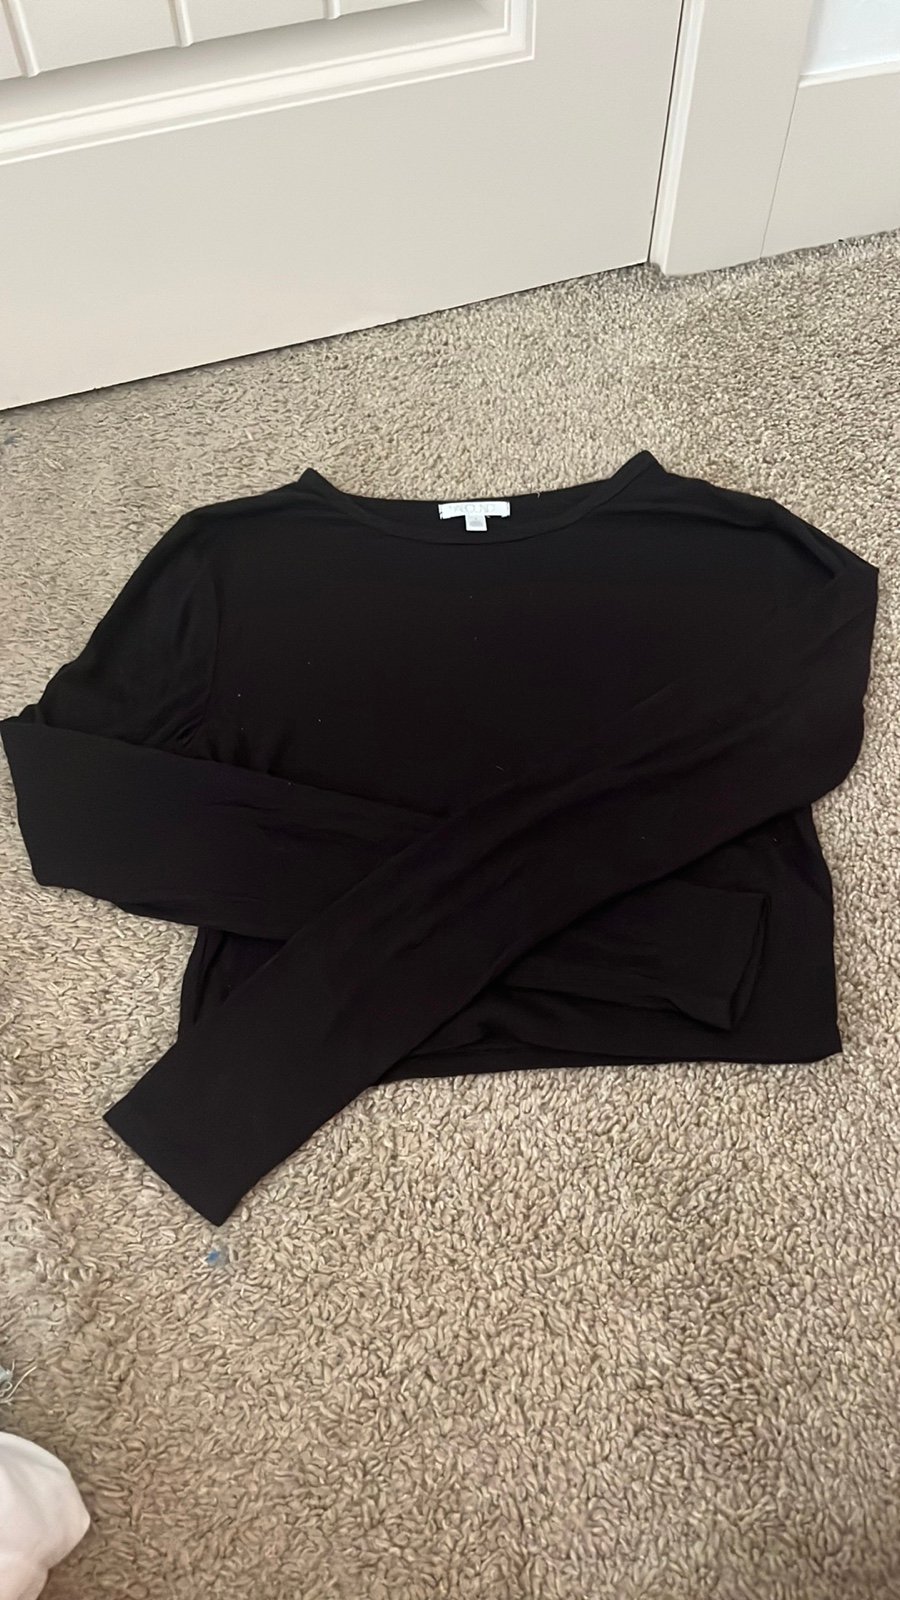 cheapest place to buy  Long Sleeve crop top oxEmlzQt3 online store